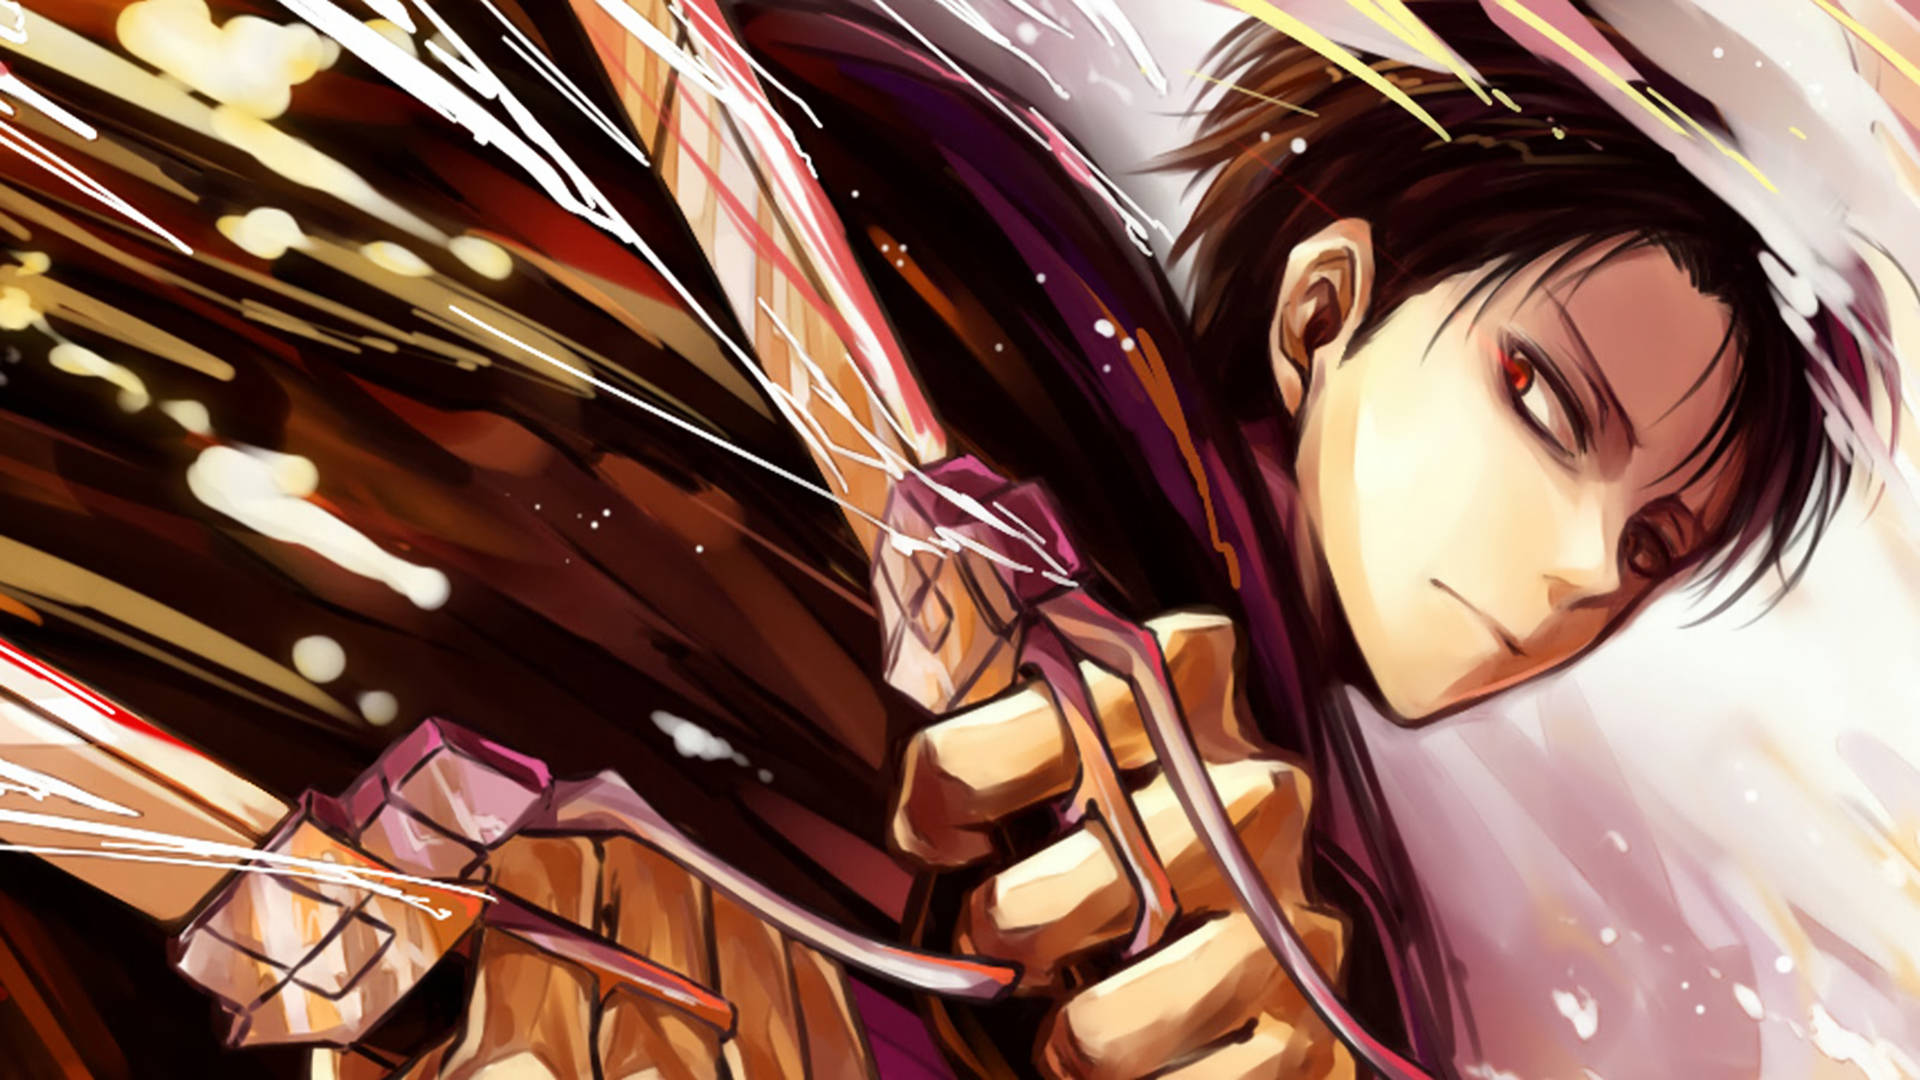 Levi Aesthetic Cool Graphic Art Background